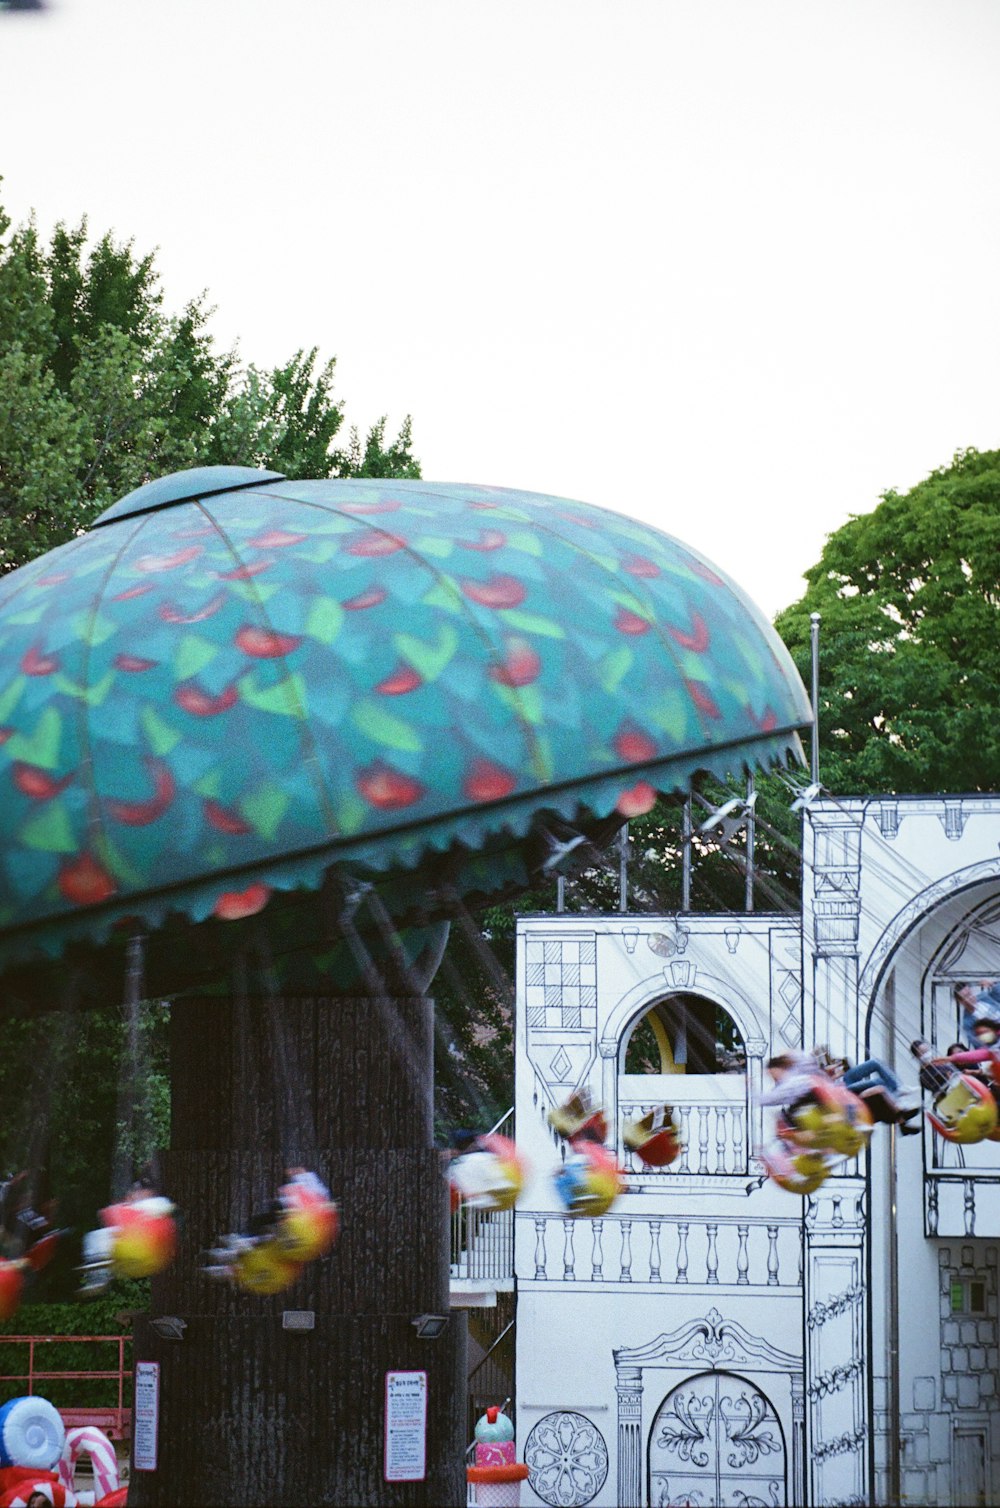 a carnival ride with a large green umbrella